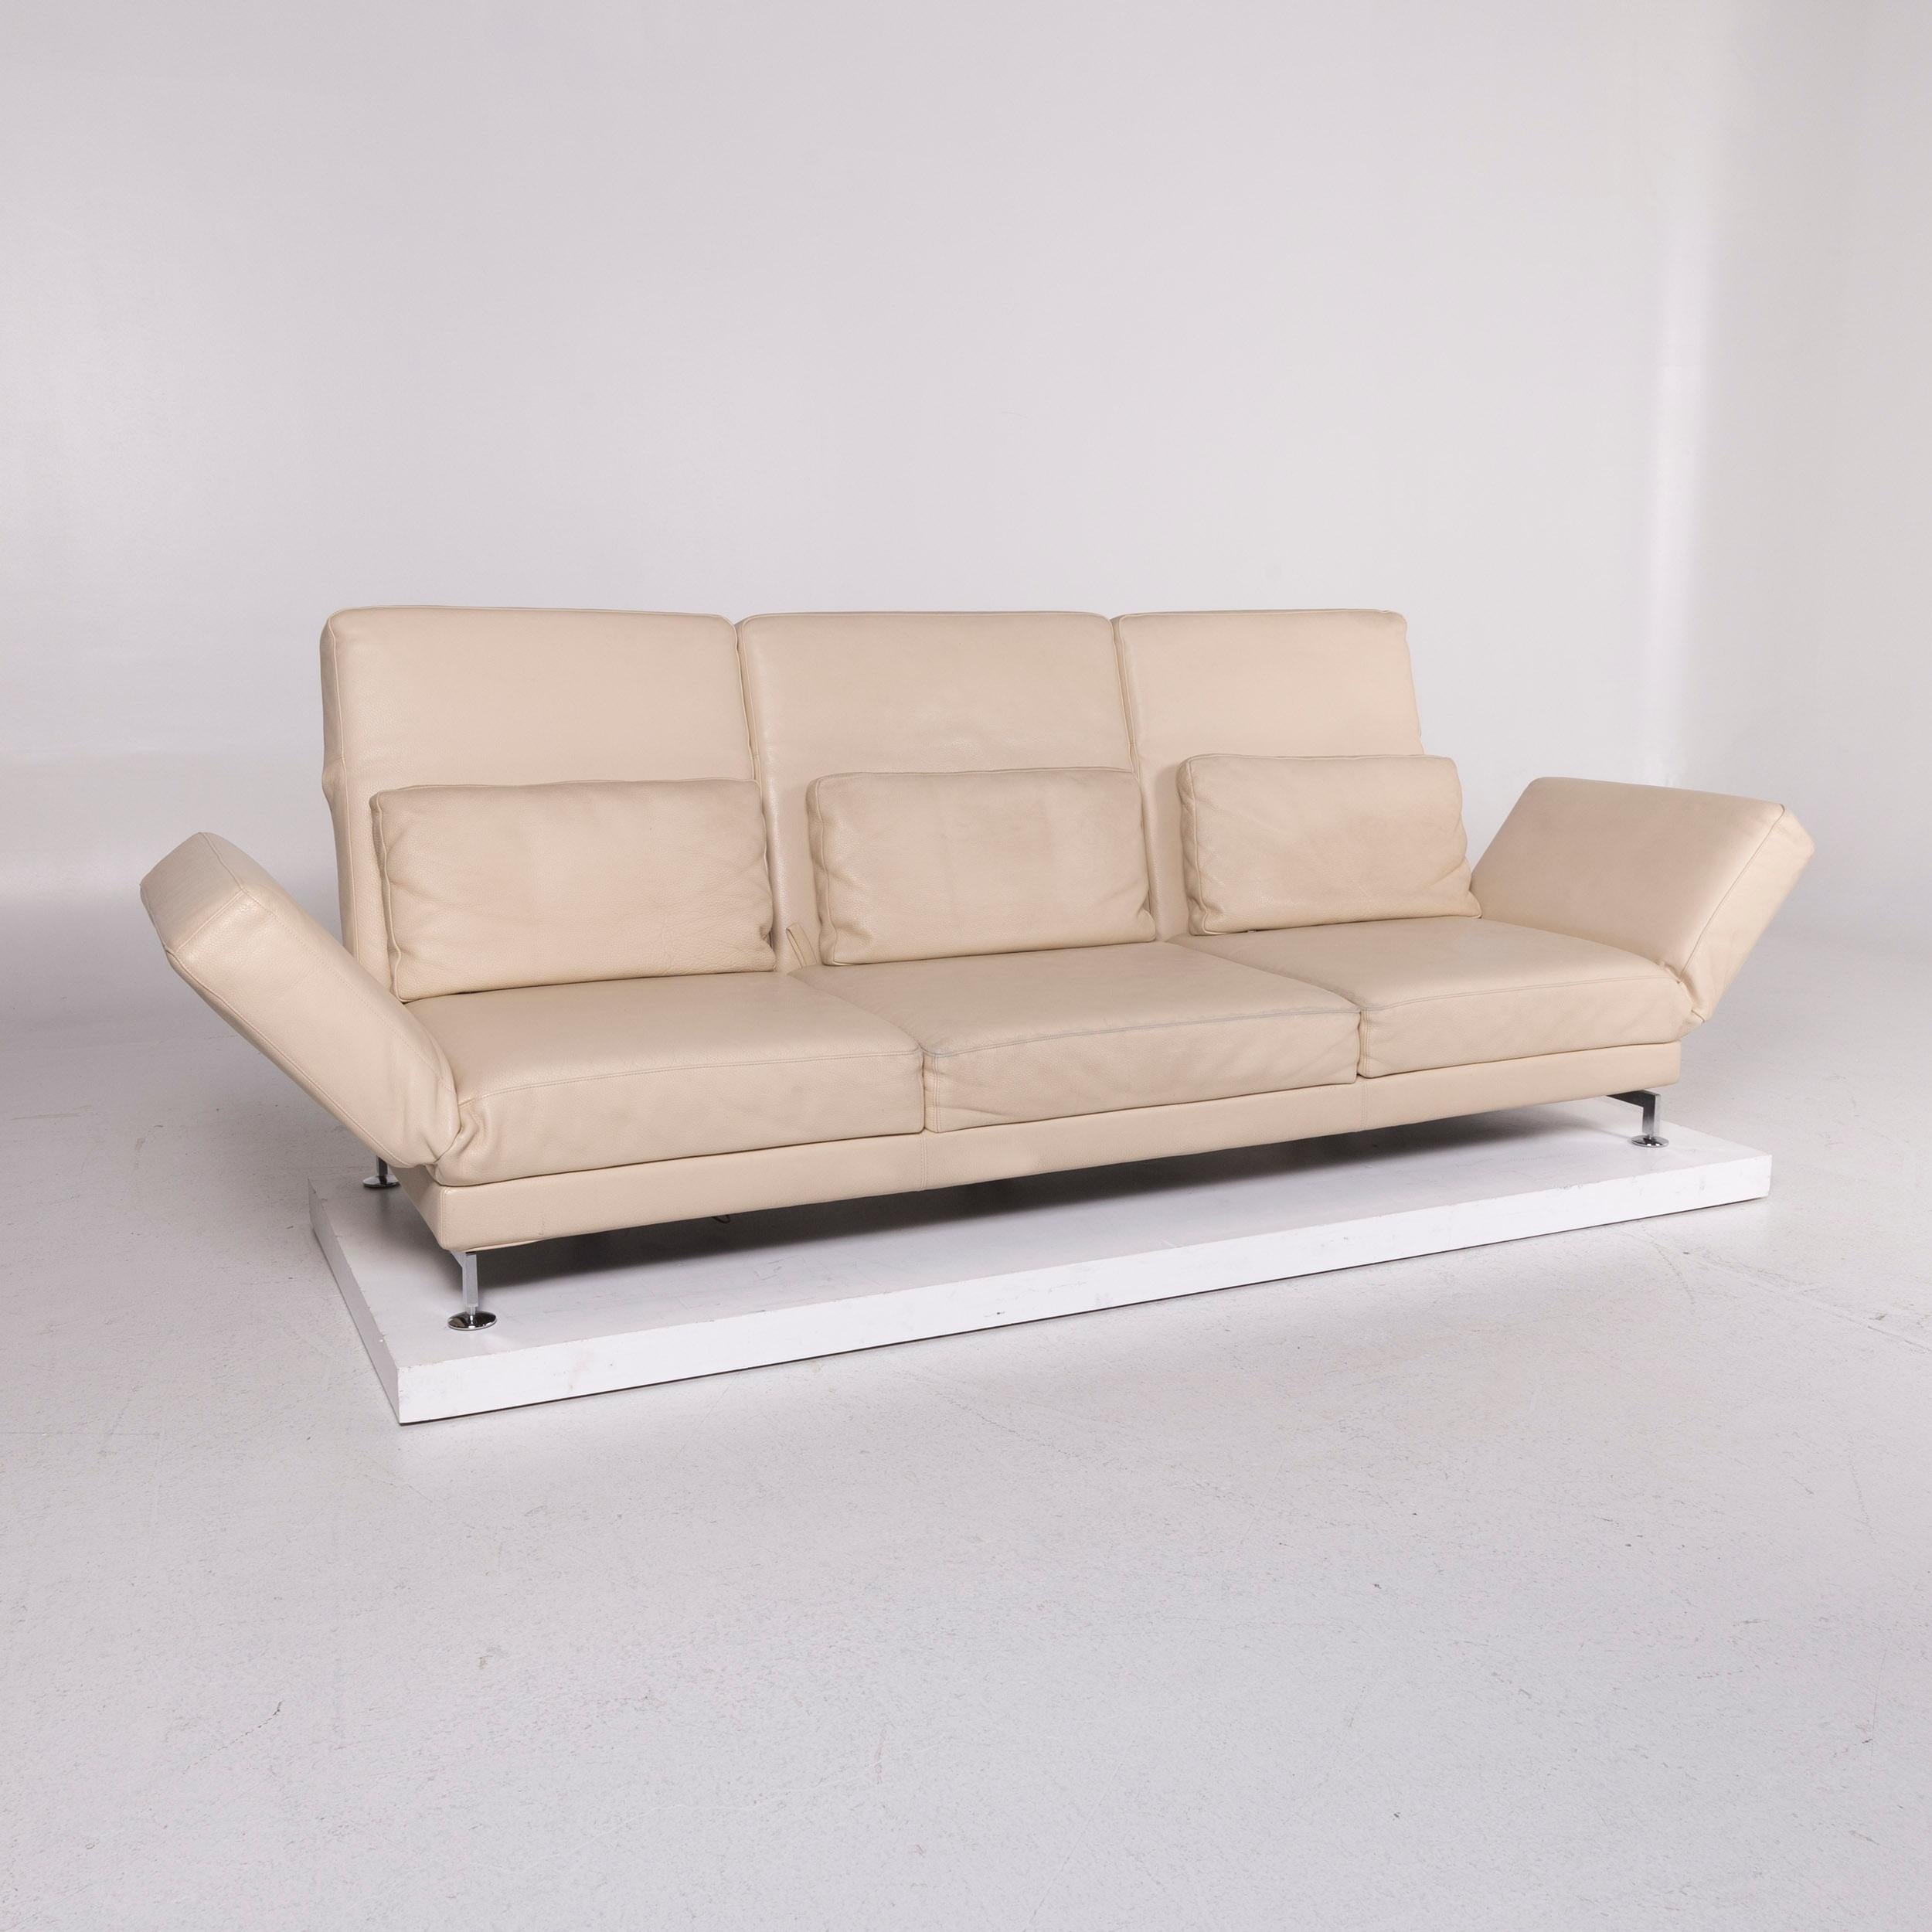 We bring to you a Brühl & Sippold Moule leather sofa beige three-seat relax function couch.
 

Product measurements in centimetres:
 

Depth 91
Width 267
Height 85
Seat-height 39
Rest-height 39
Seat-depth 68
Seat-width 219
Back-height